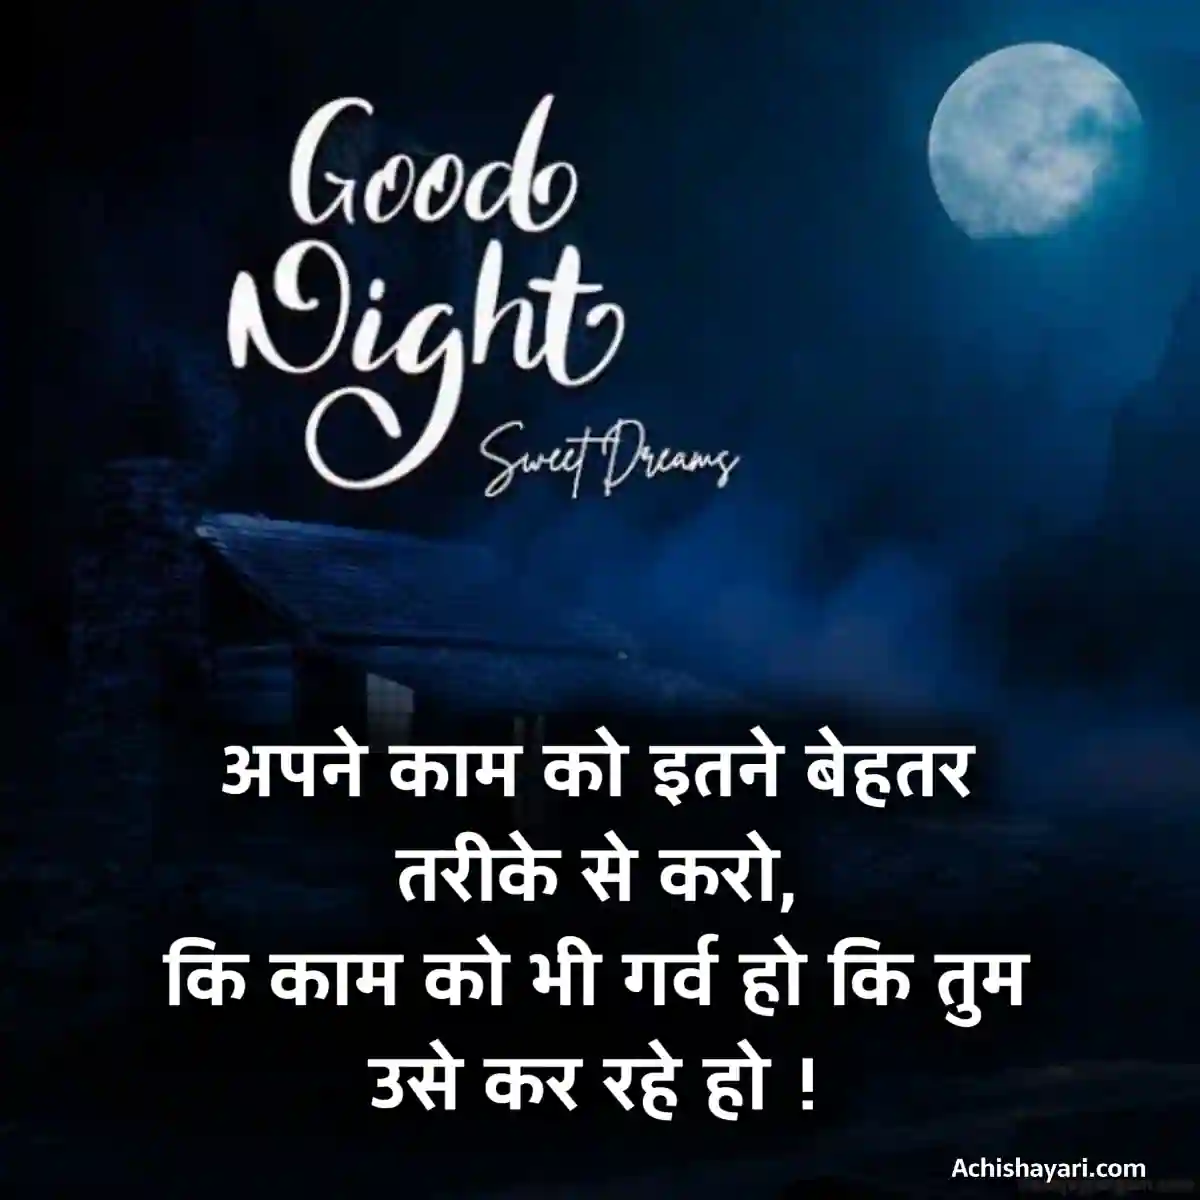 Over 999+ Incredible Collection of Good Night Images in Hindi – Full 4K Magnificence